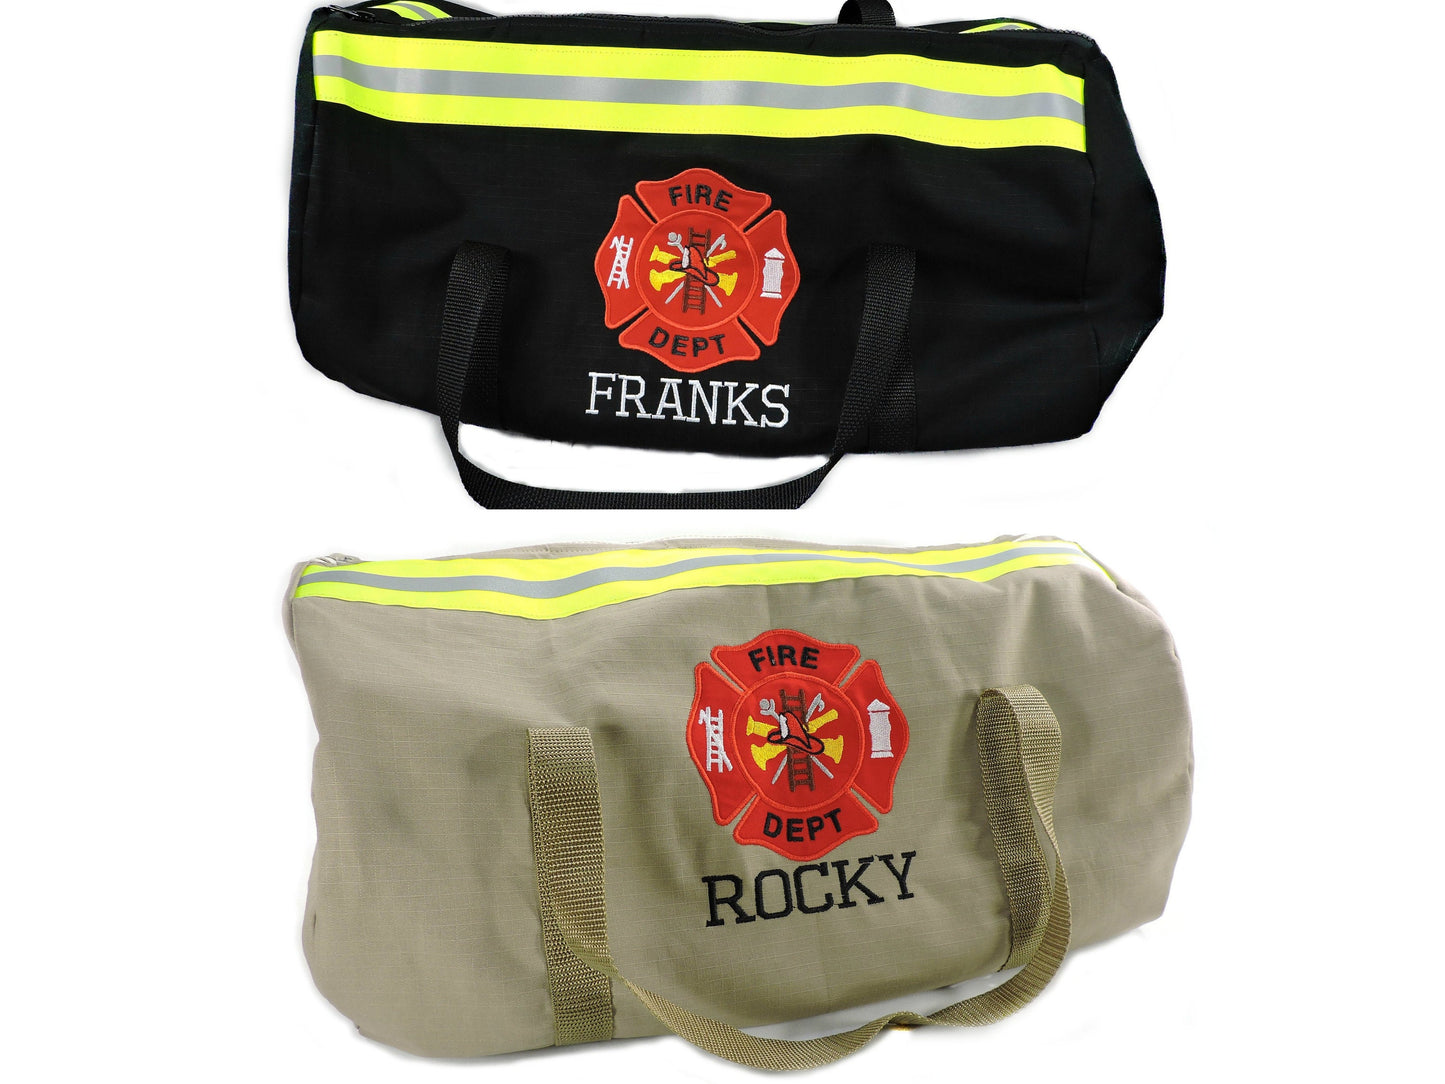 firefighter duffel bag with neon yellow tape